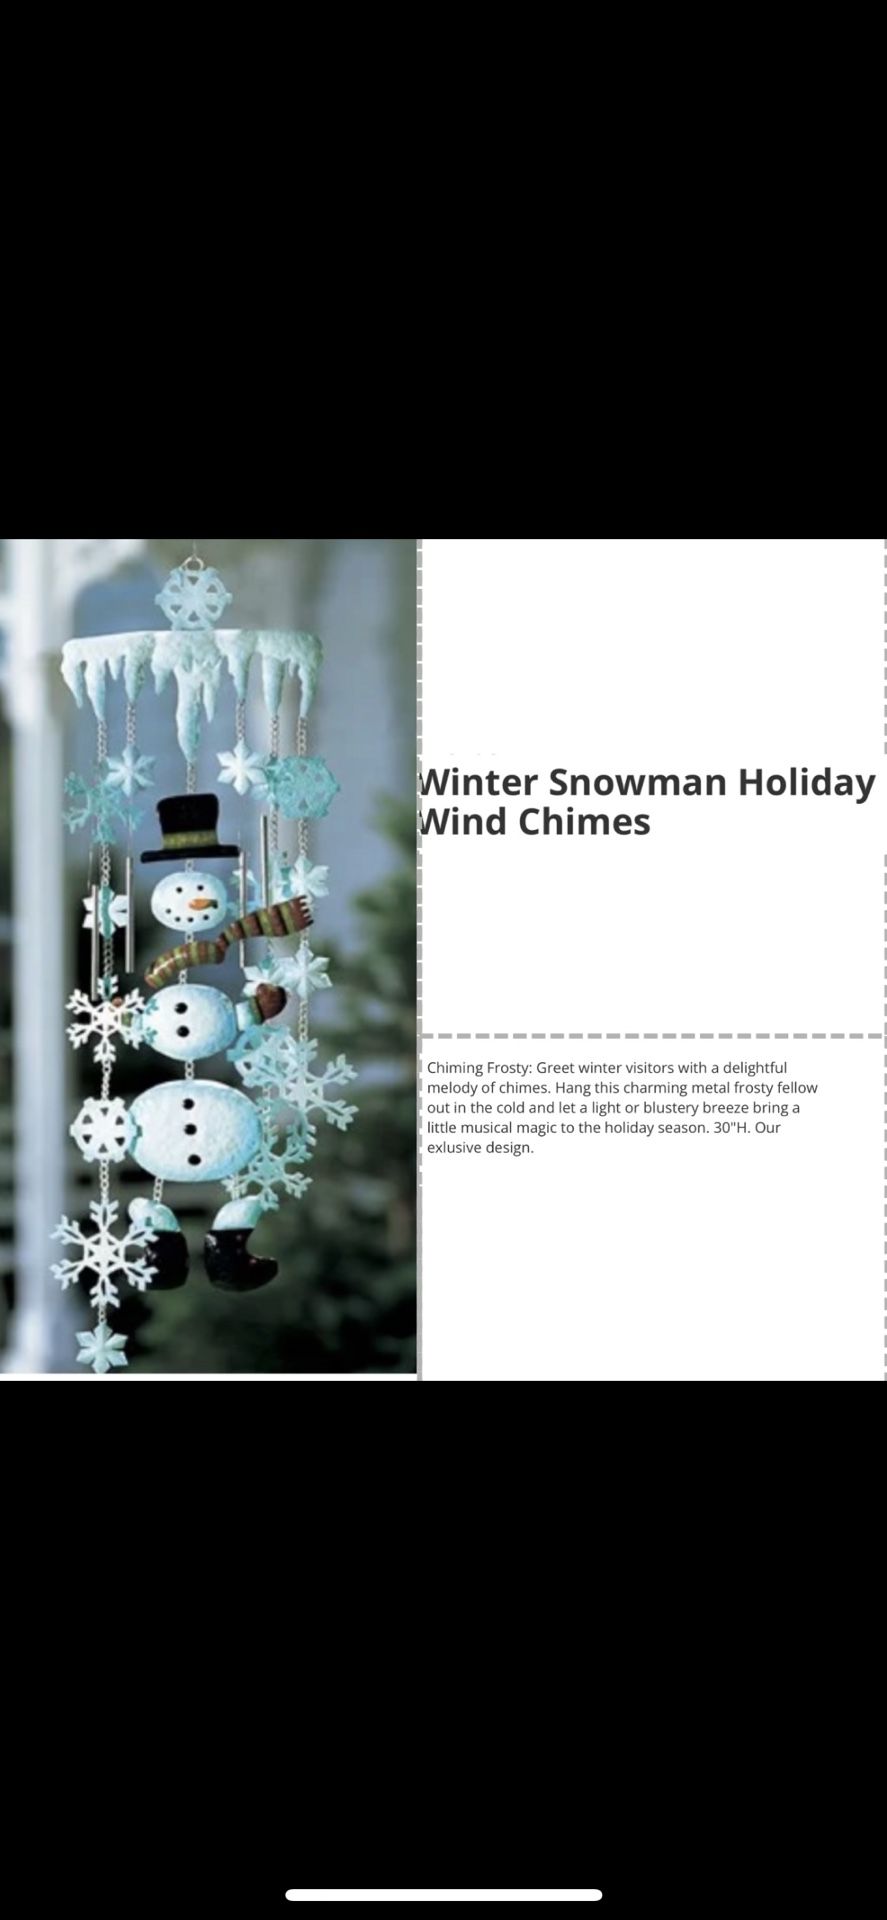 Winter Snowman Holiday Wind Chimes